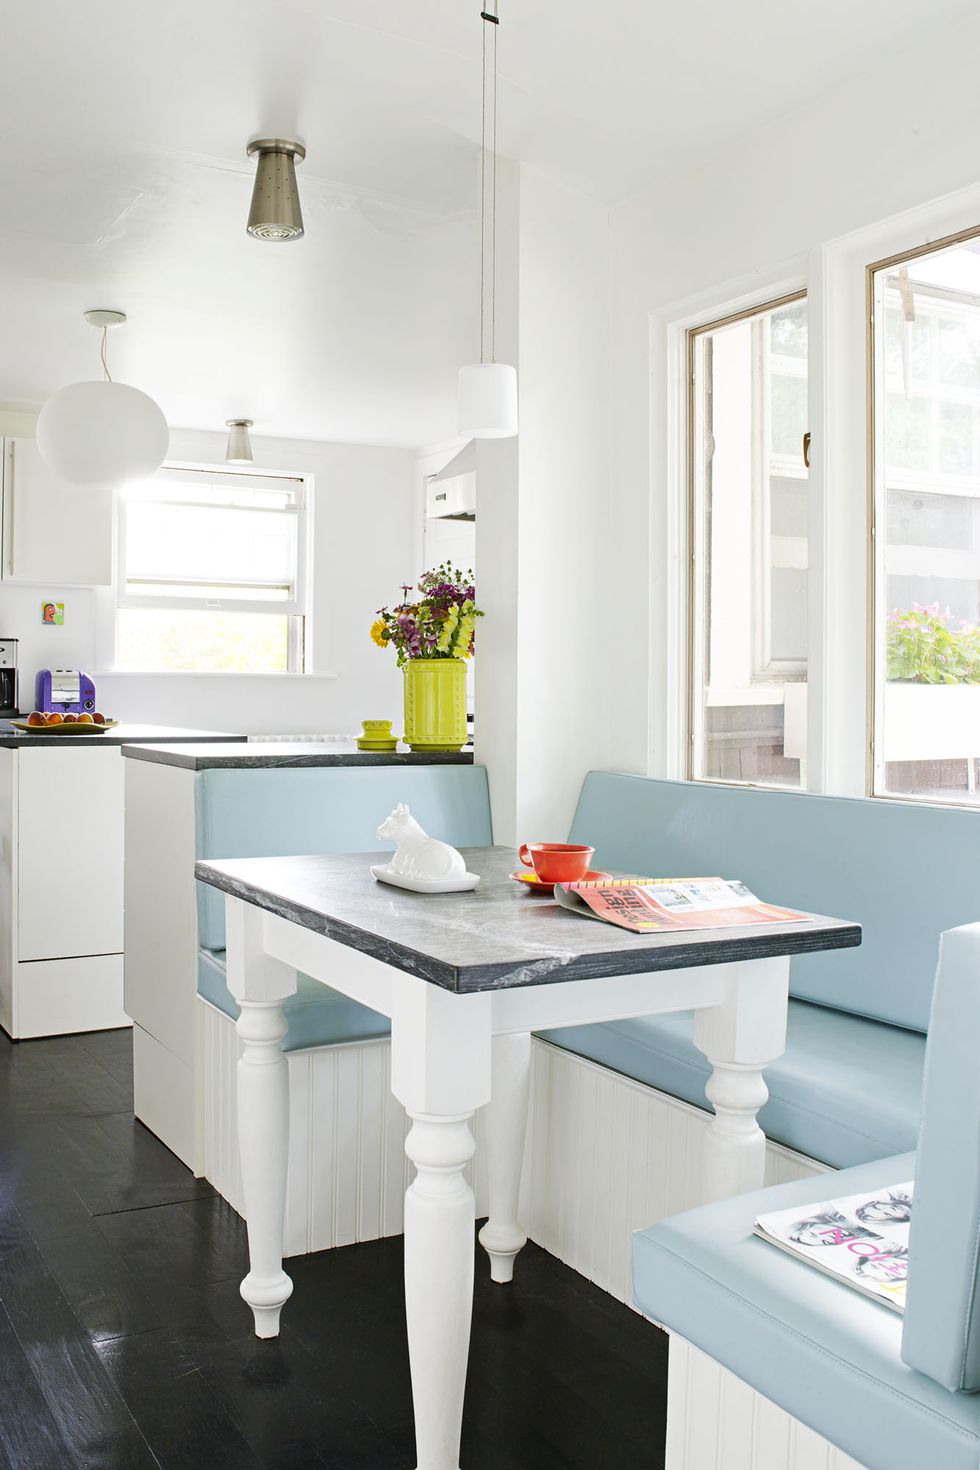 https://hips.hearstapps.com/hmg-prod/images/breakfast-nook-ideas-light-blue-square-table-1643130007.jpg?crop=1xw:0.99975xh;center,top&resize=980:*